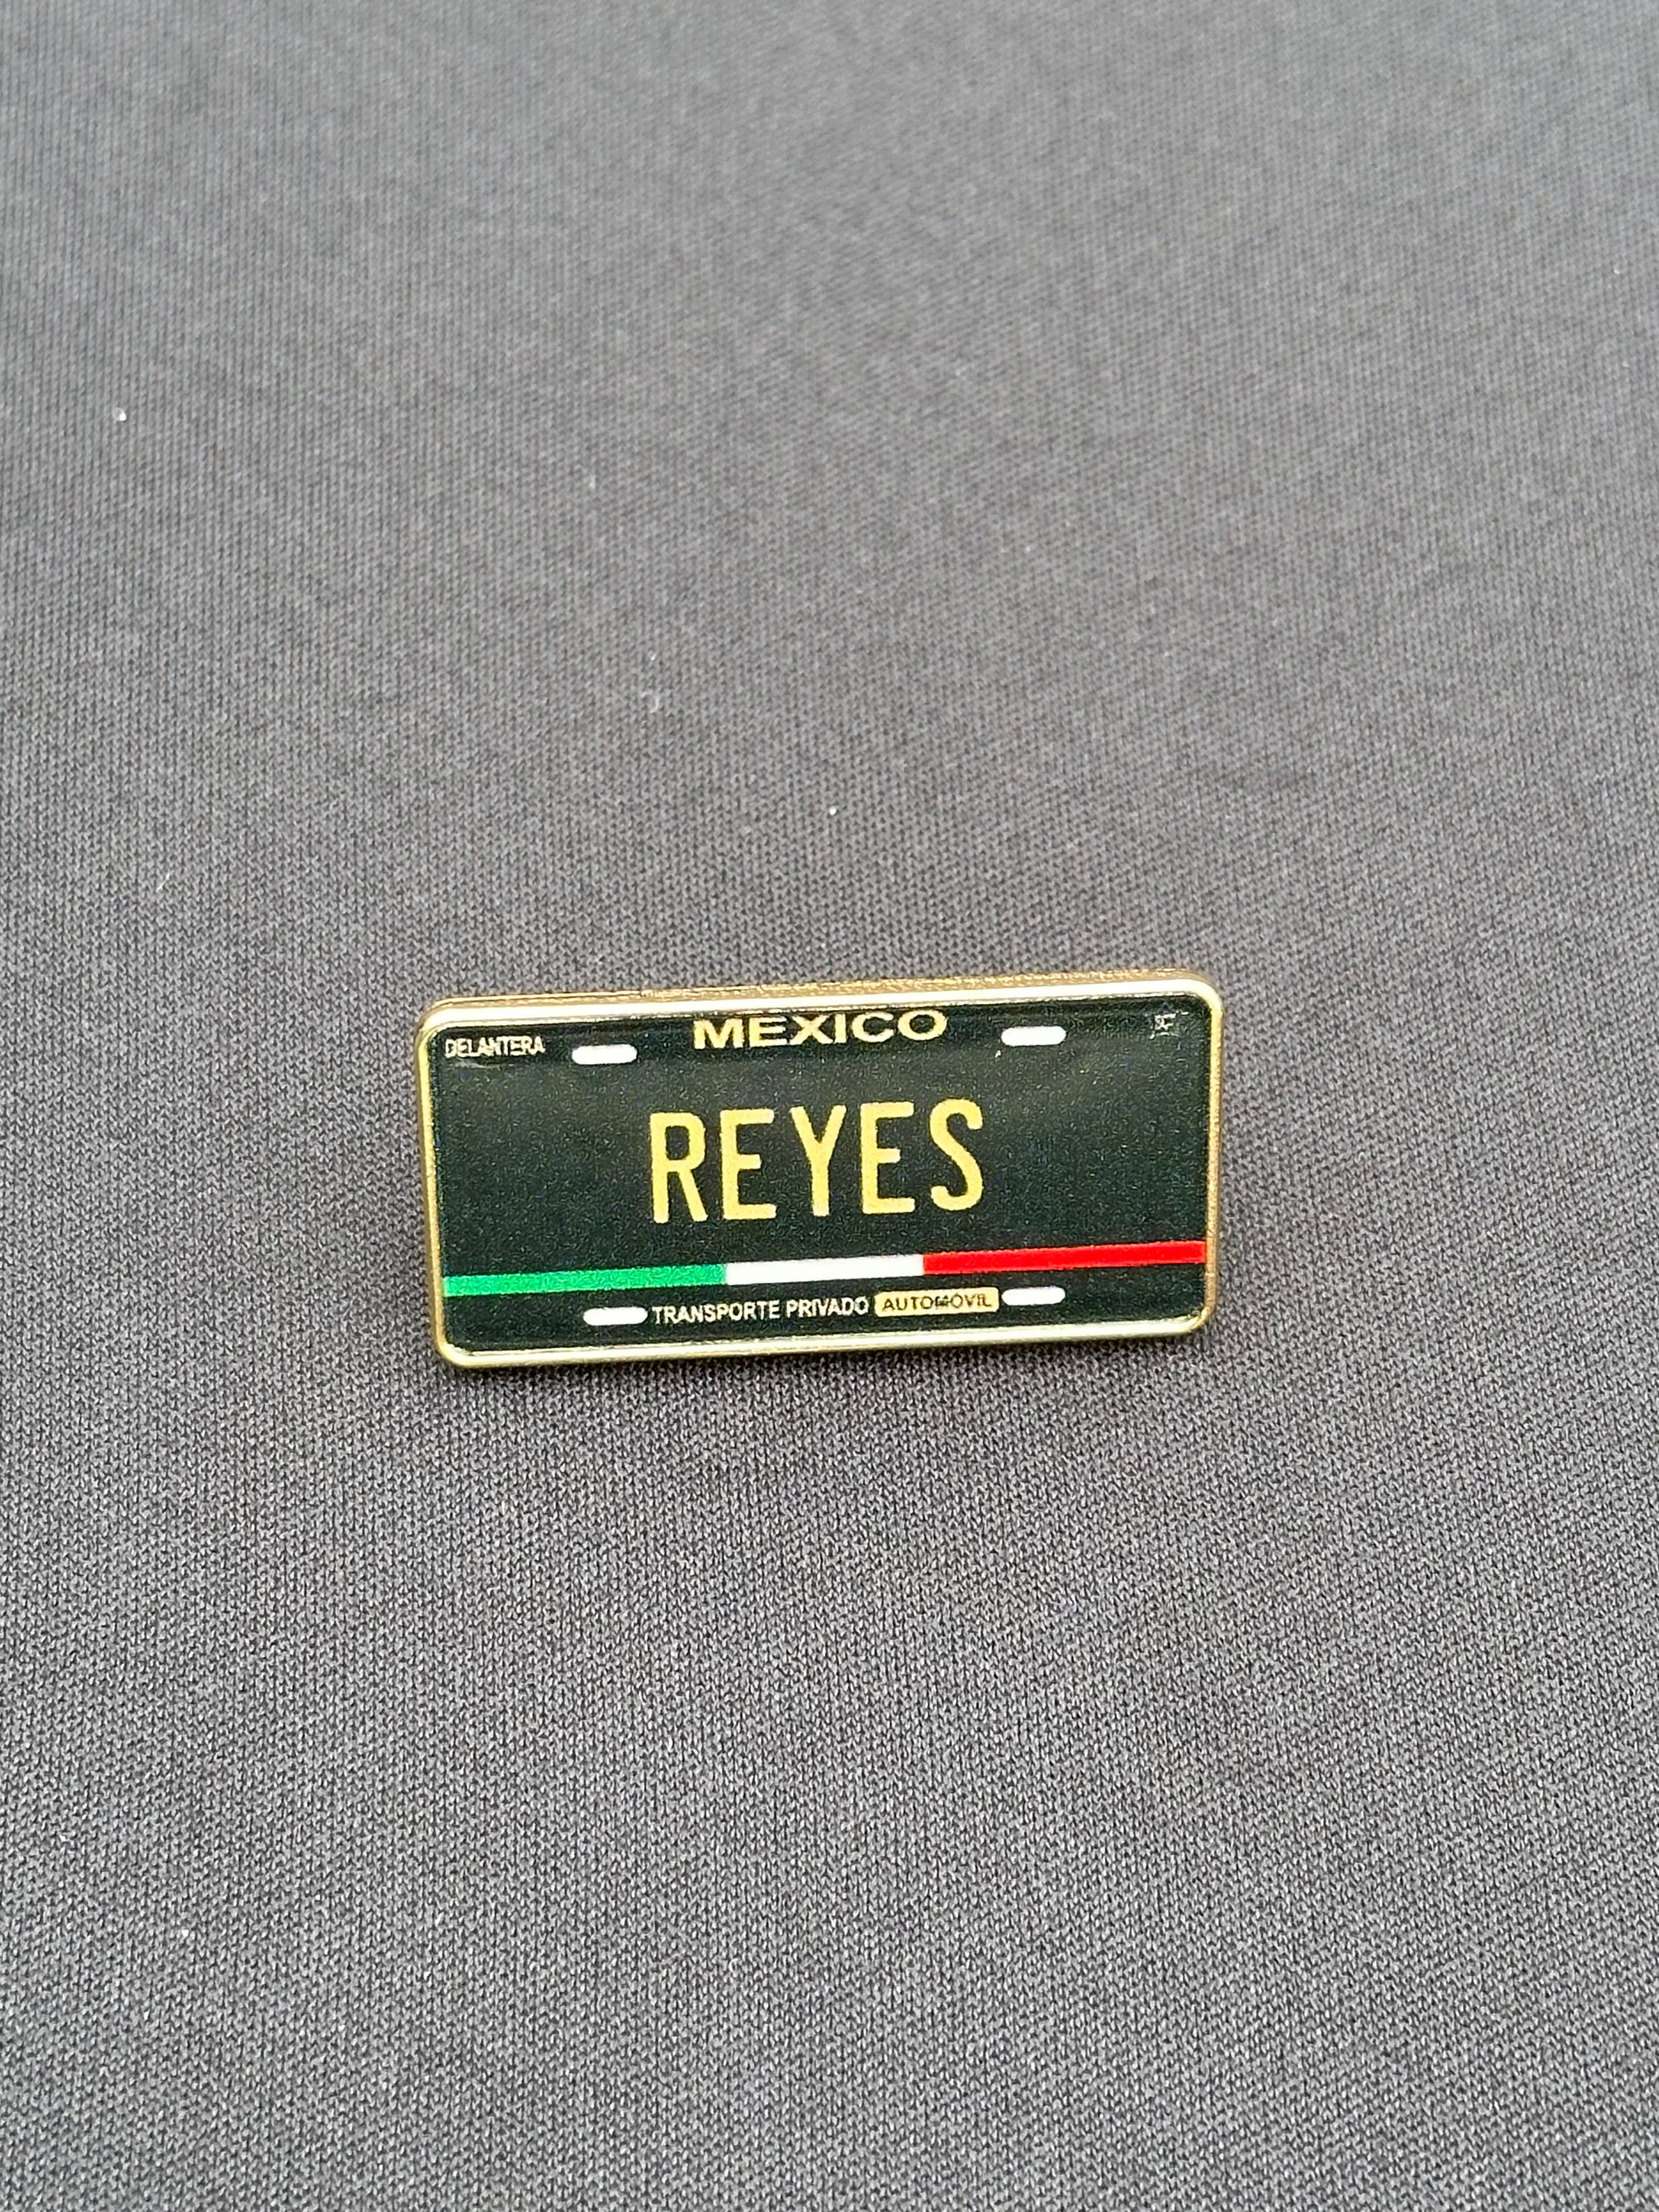 *NEW BLACK "REYES" EXCLUSIVE LICENSE PLATE PIN VERY LIMITED